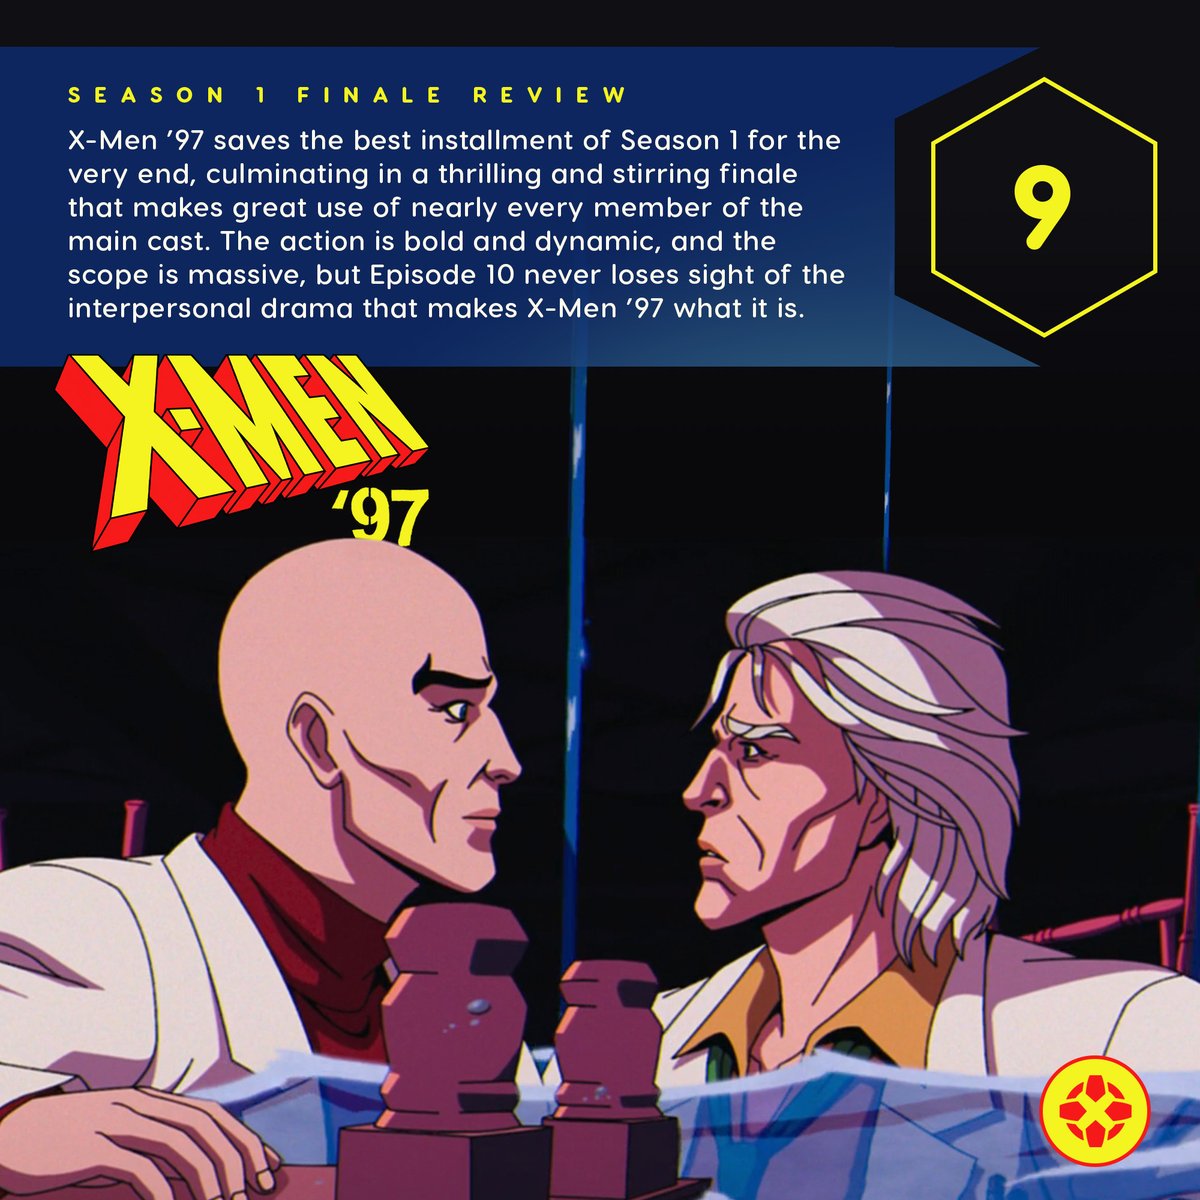 The Season 1 finale of X-Men '97 is rich with emotion, from old friends reconnecting to bittersweet family reunions and intense action, the best was saved for last. bit.ly/4apBHCG